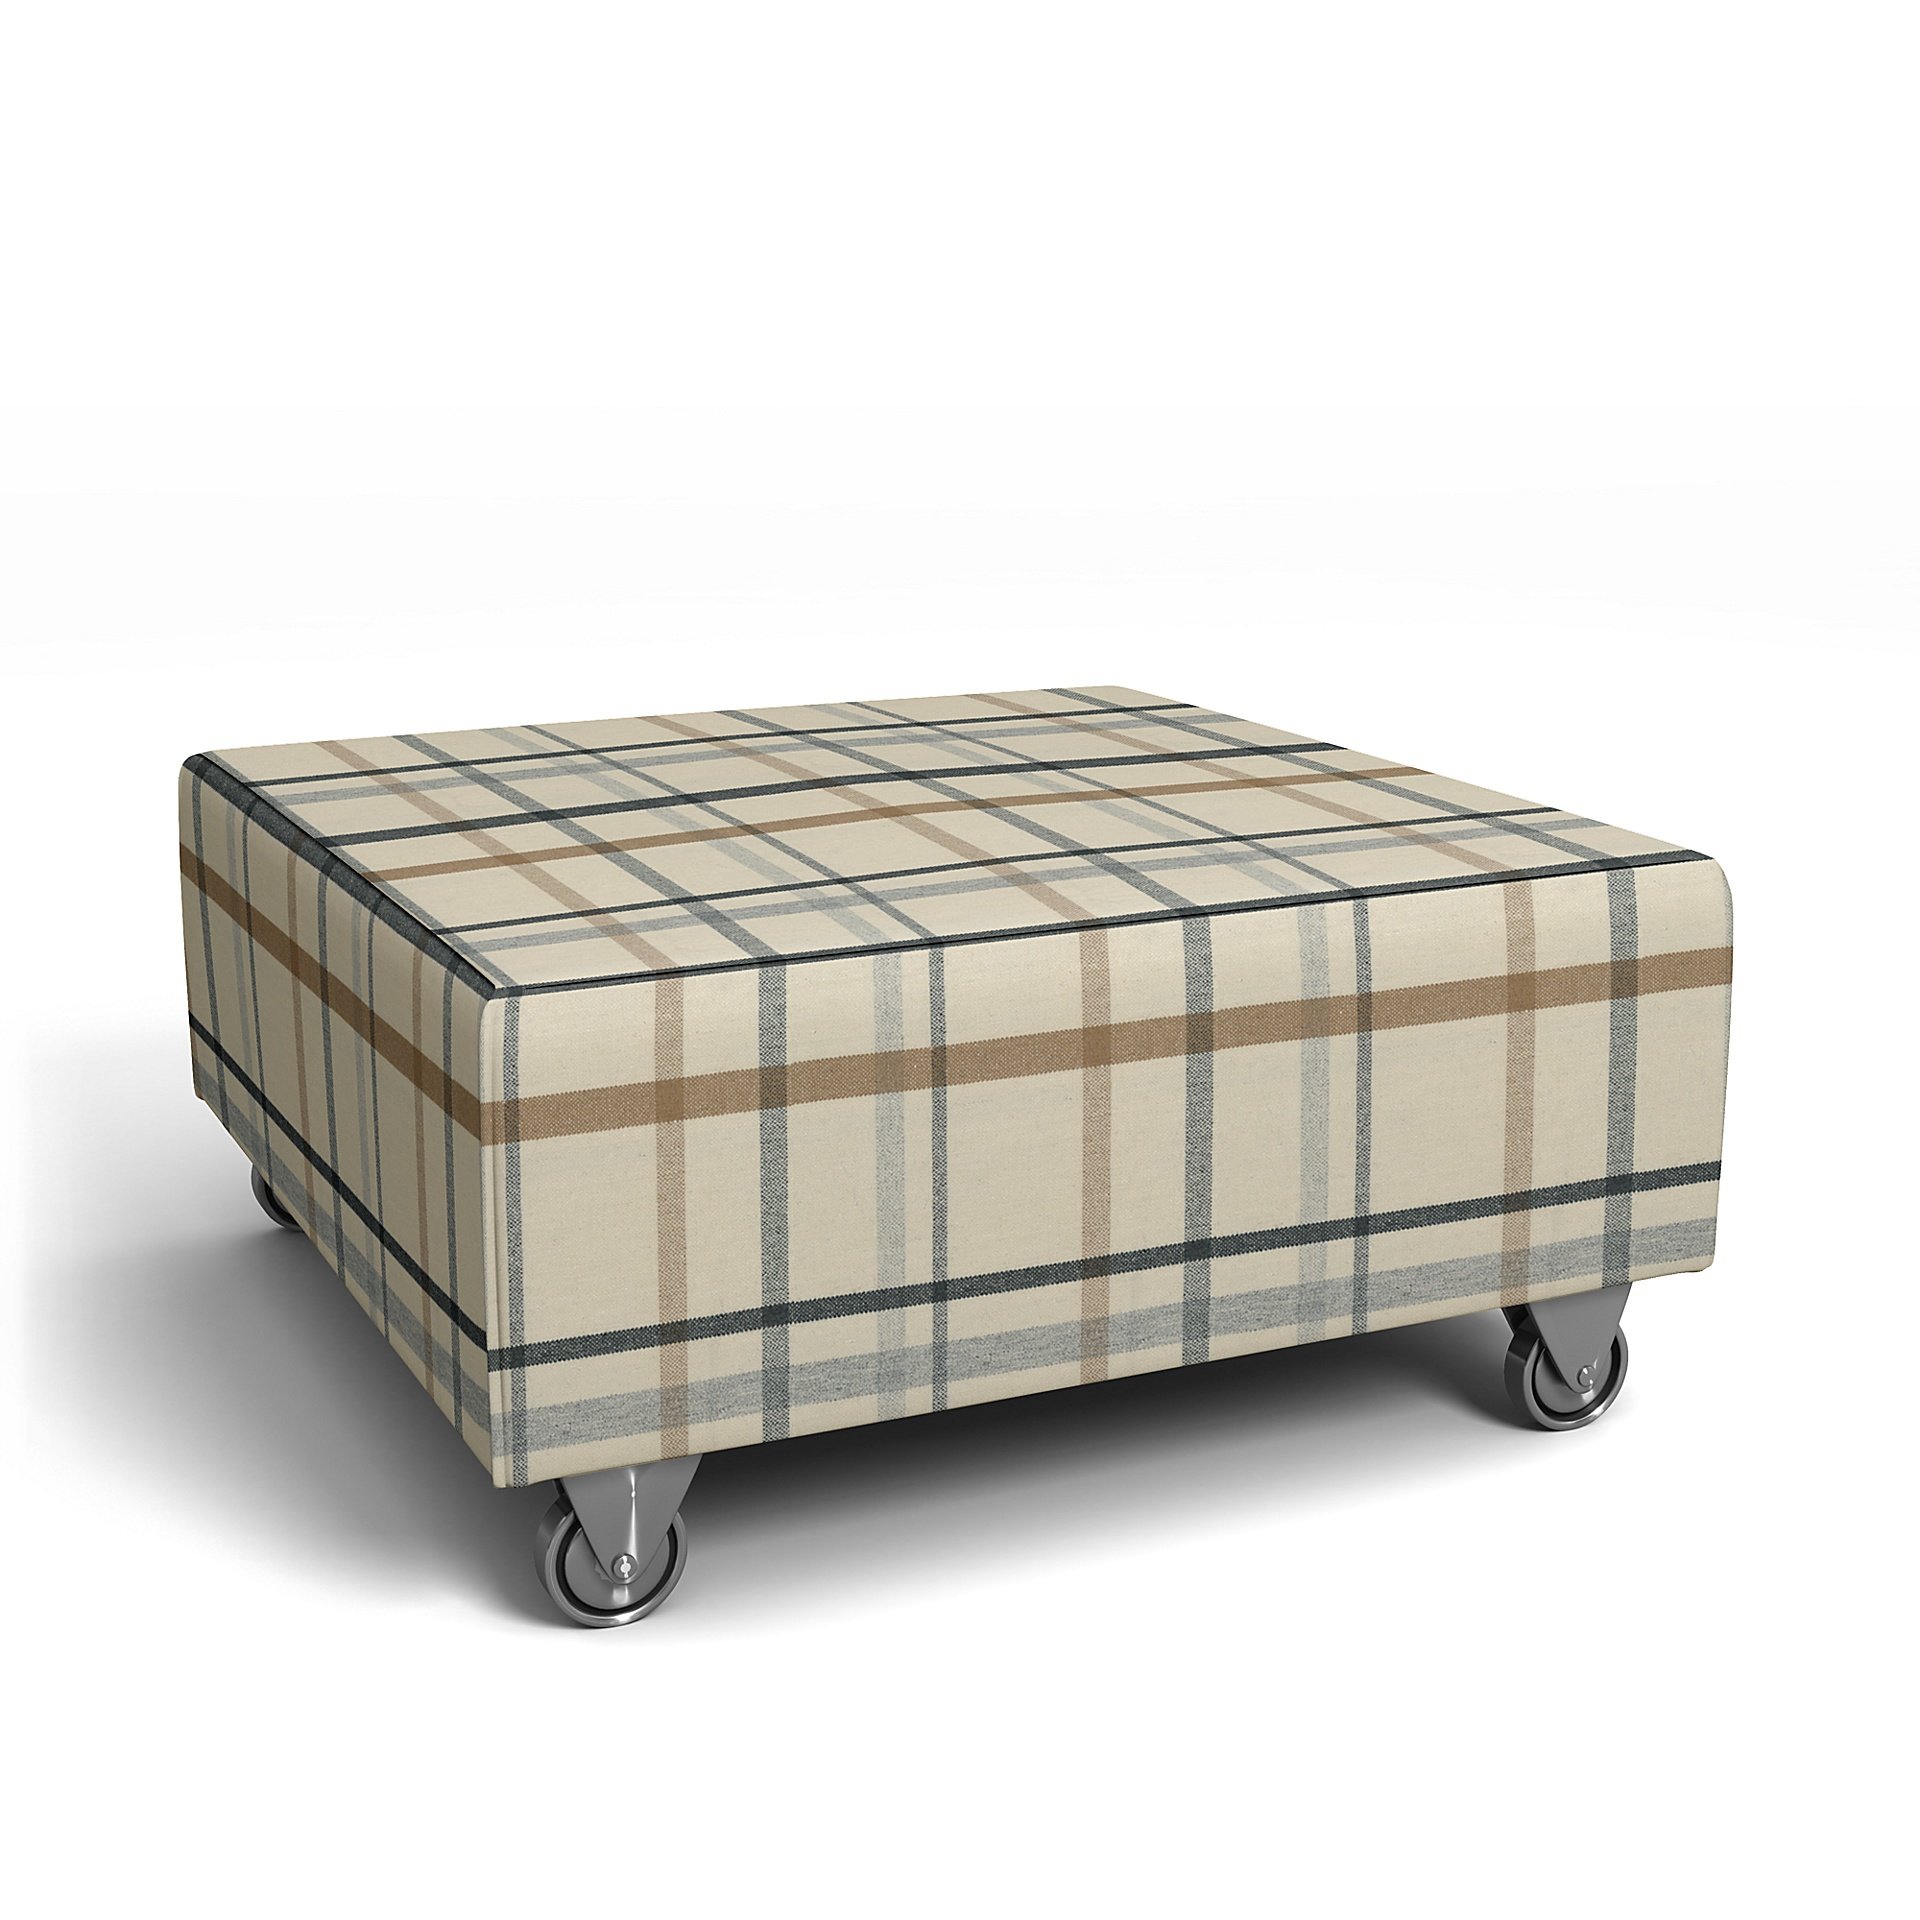 IKEA - Falsterbo Footstool Cover, Fawn Brown, Wool - Bemz